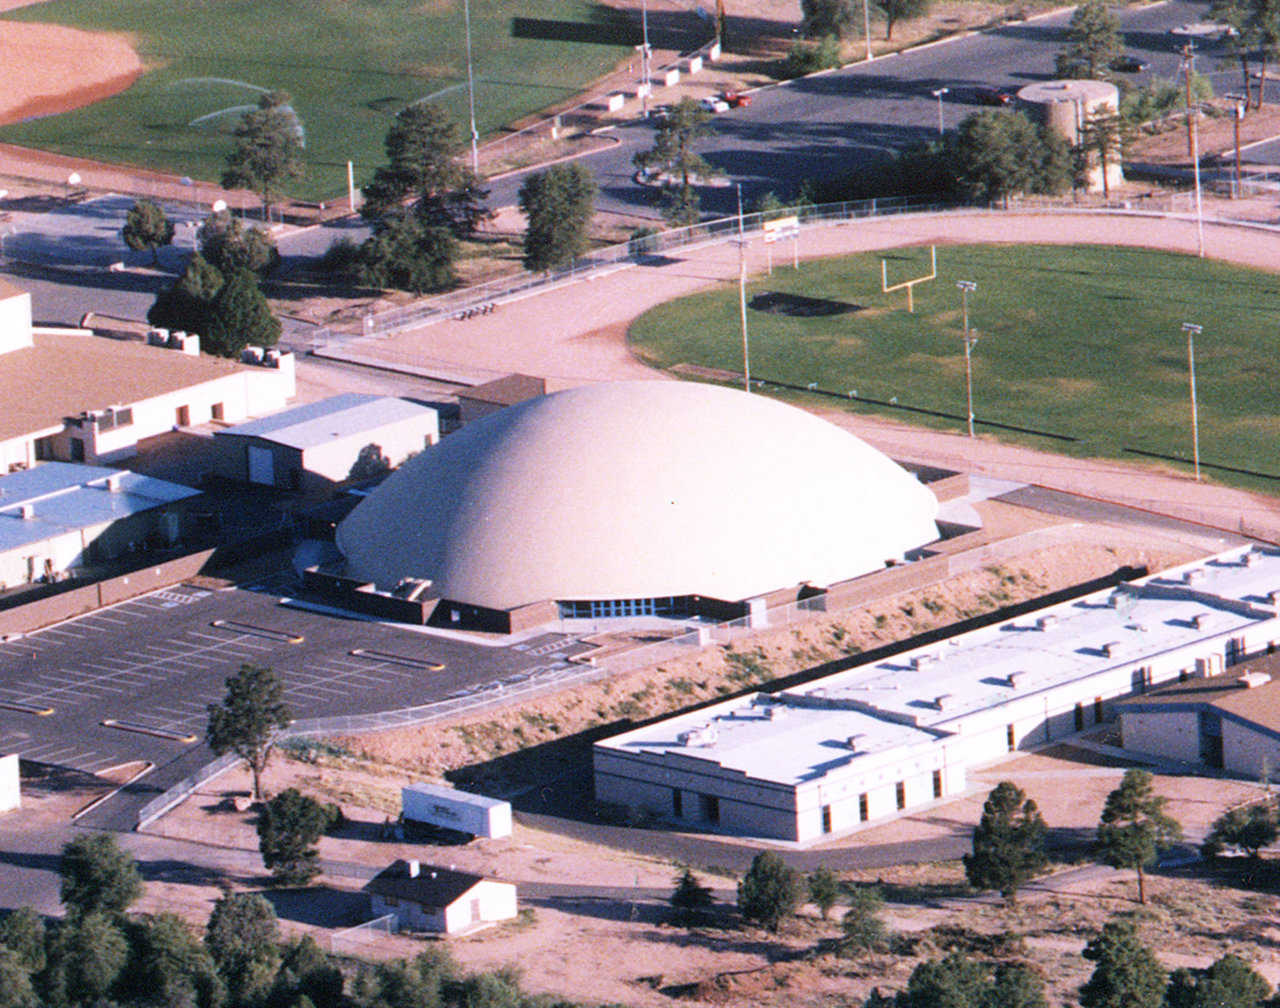 Aerial view — This Monolithic Dome sports center has a diameter of 200 feet.